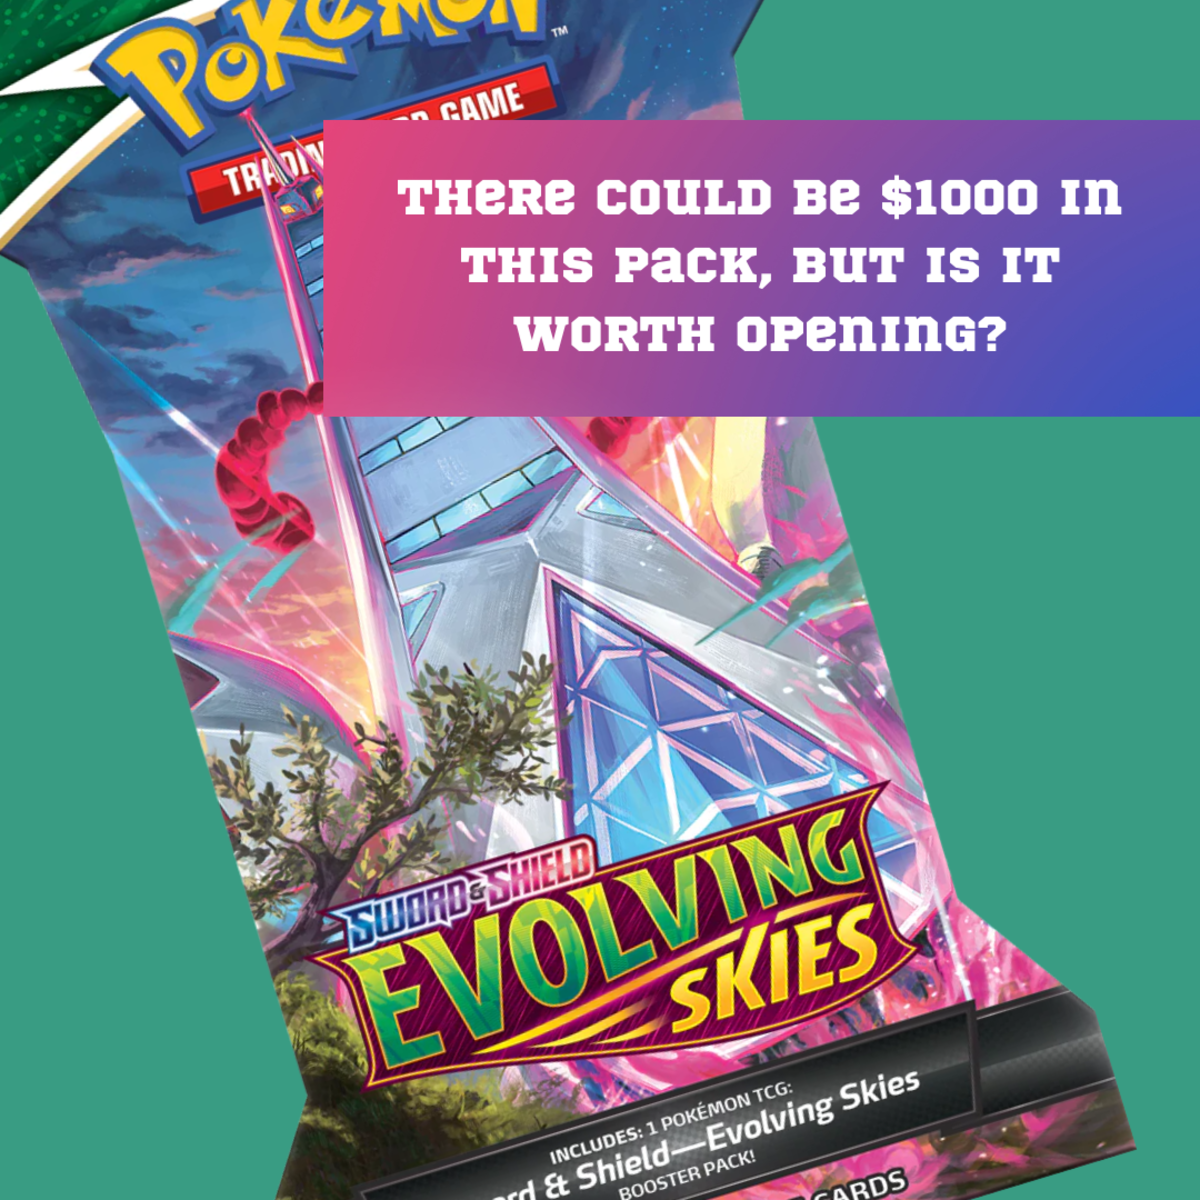 Pokémon TCG: If You Open Up This $4 Booster Pack, You Could Be $1000 Richer